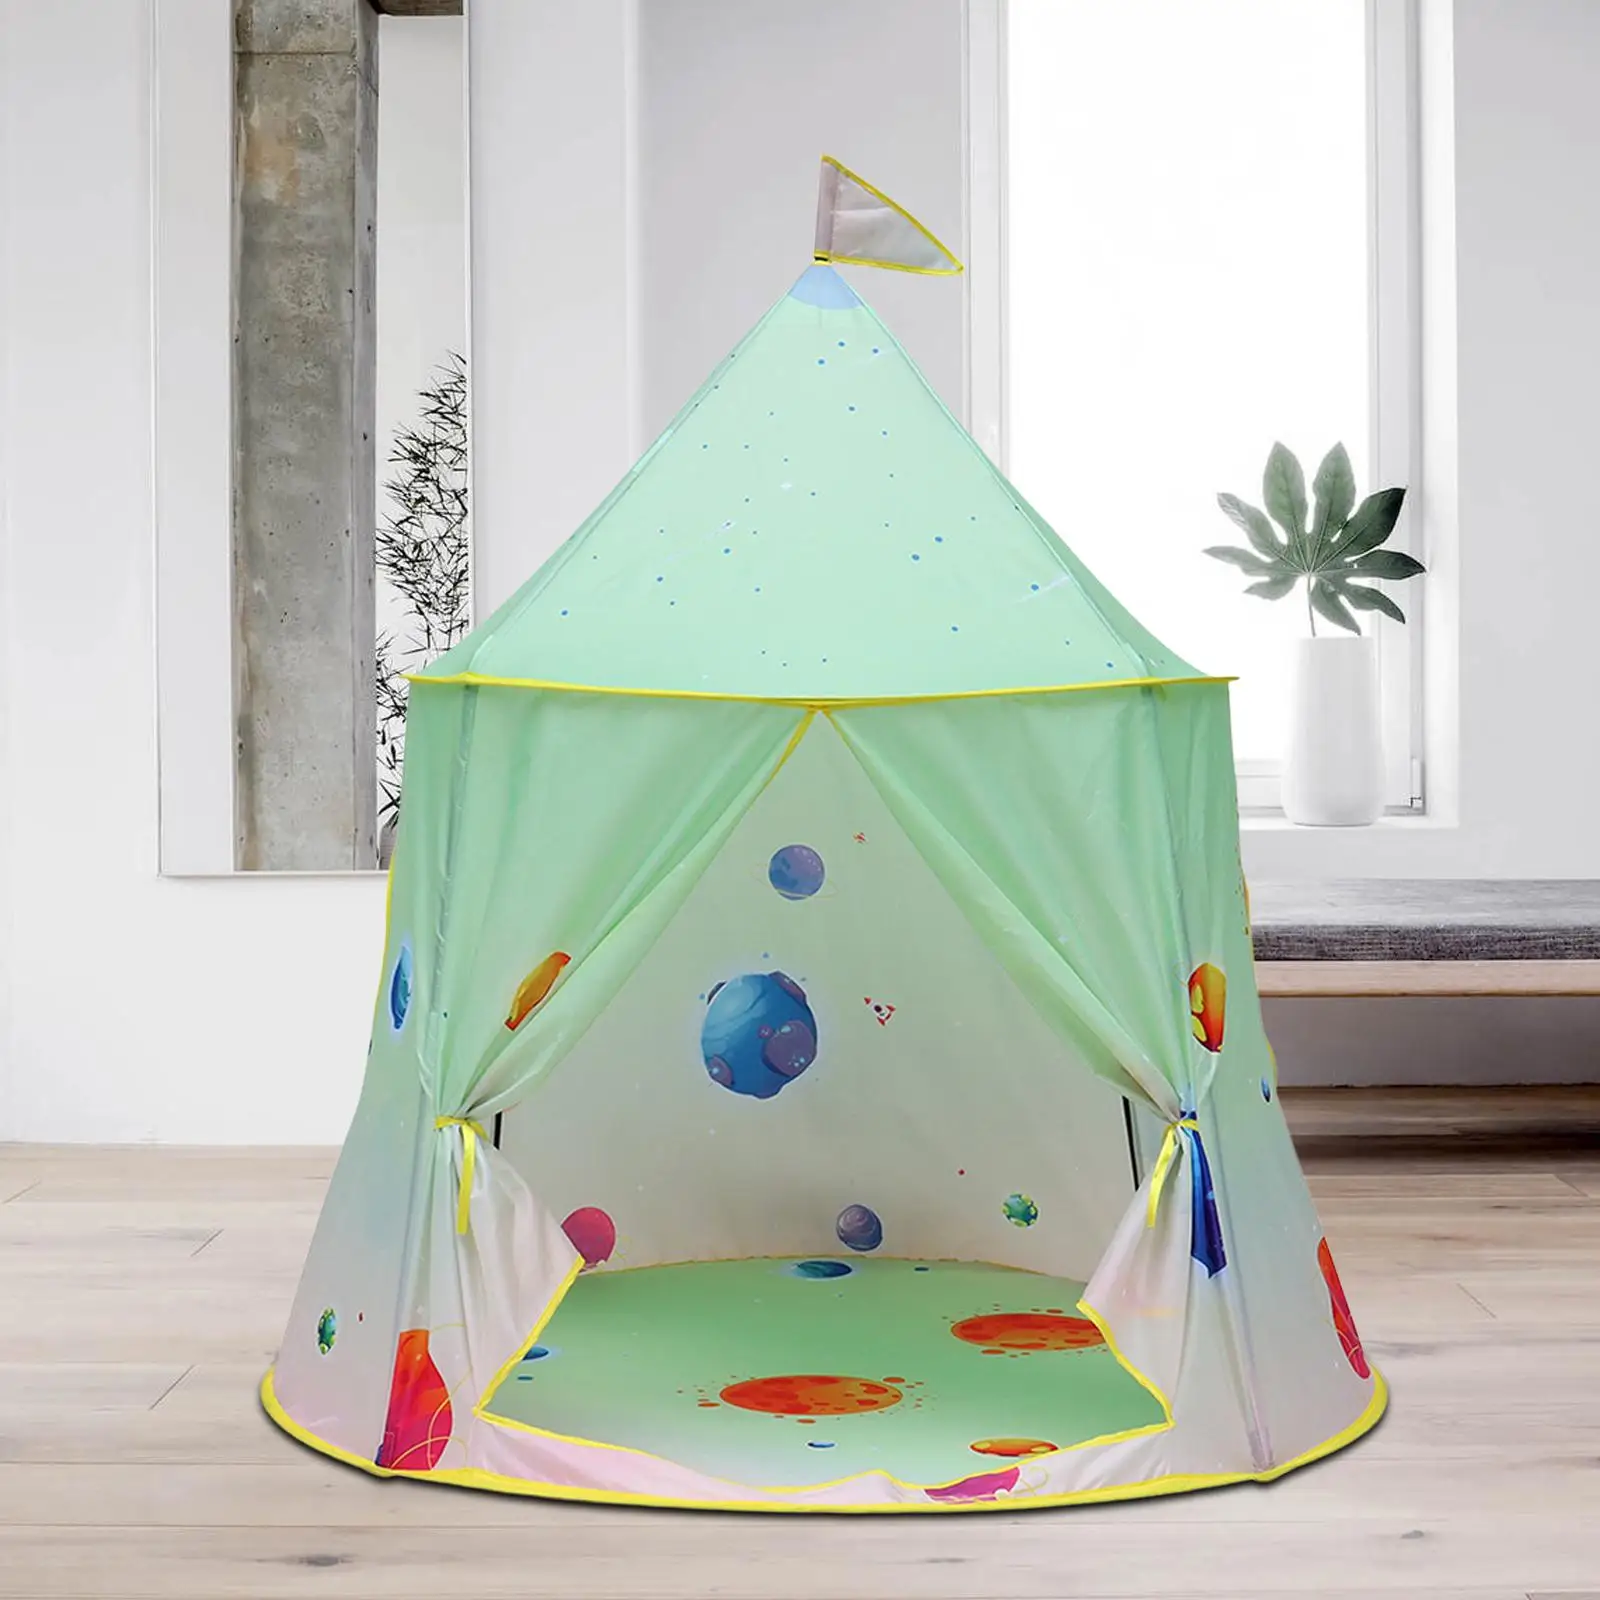 Space Themed Play Tent Castle Easy Assemble Kids Play House Pretend Play Tent Spaceship Tent for Camping Indoor Boy Girl Gifts